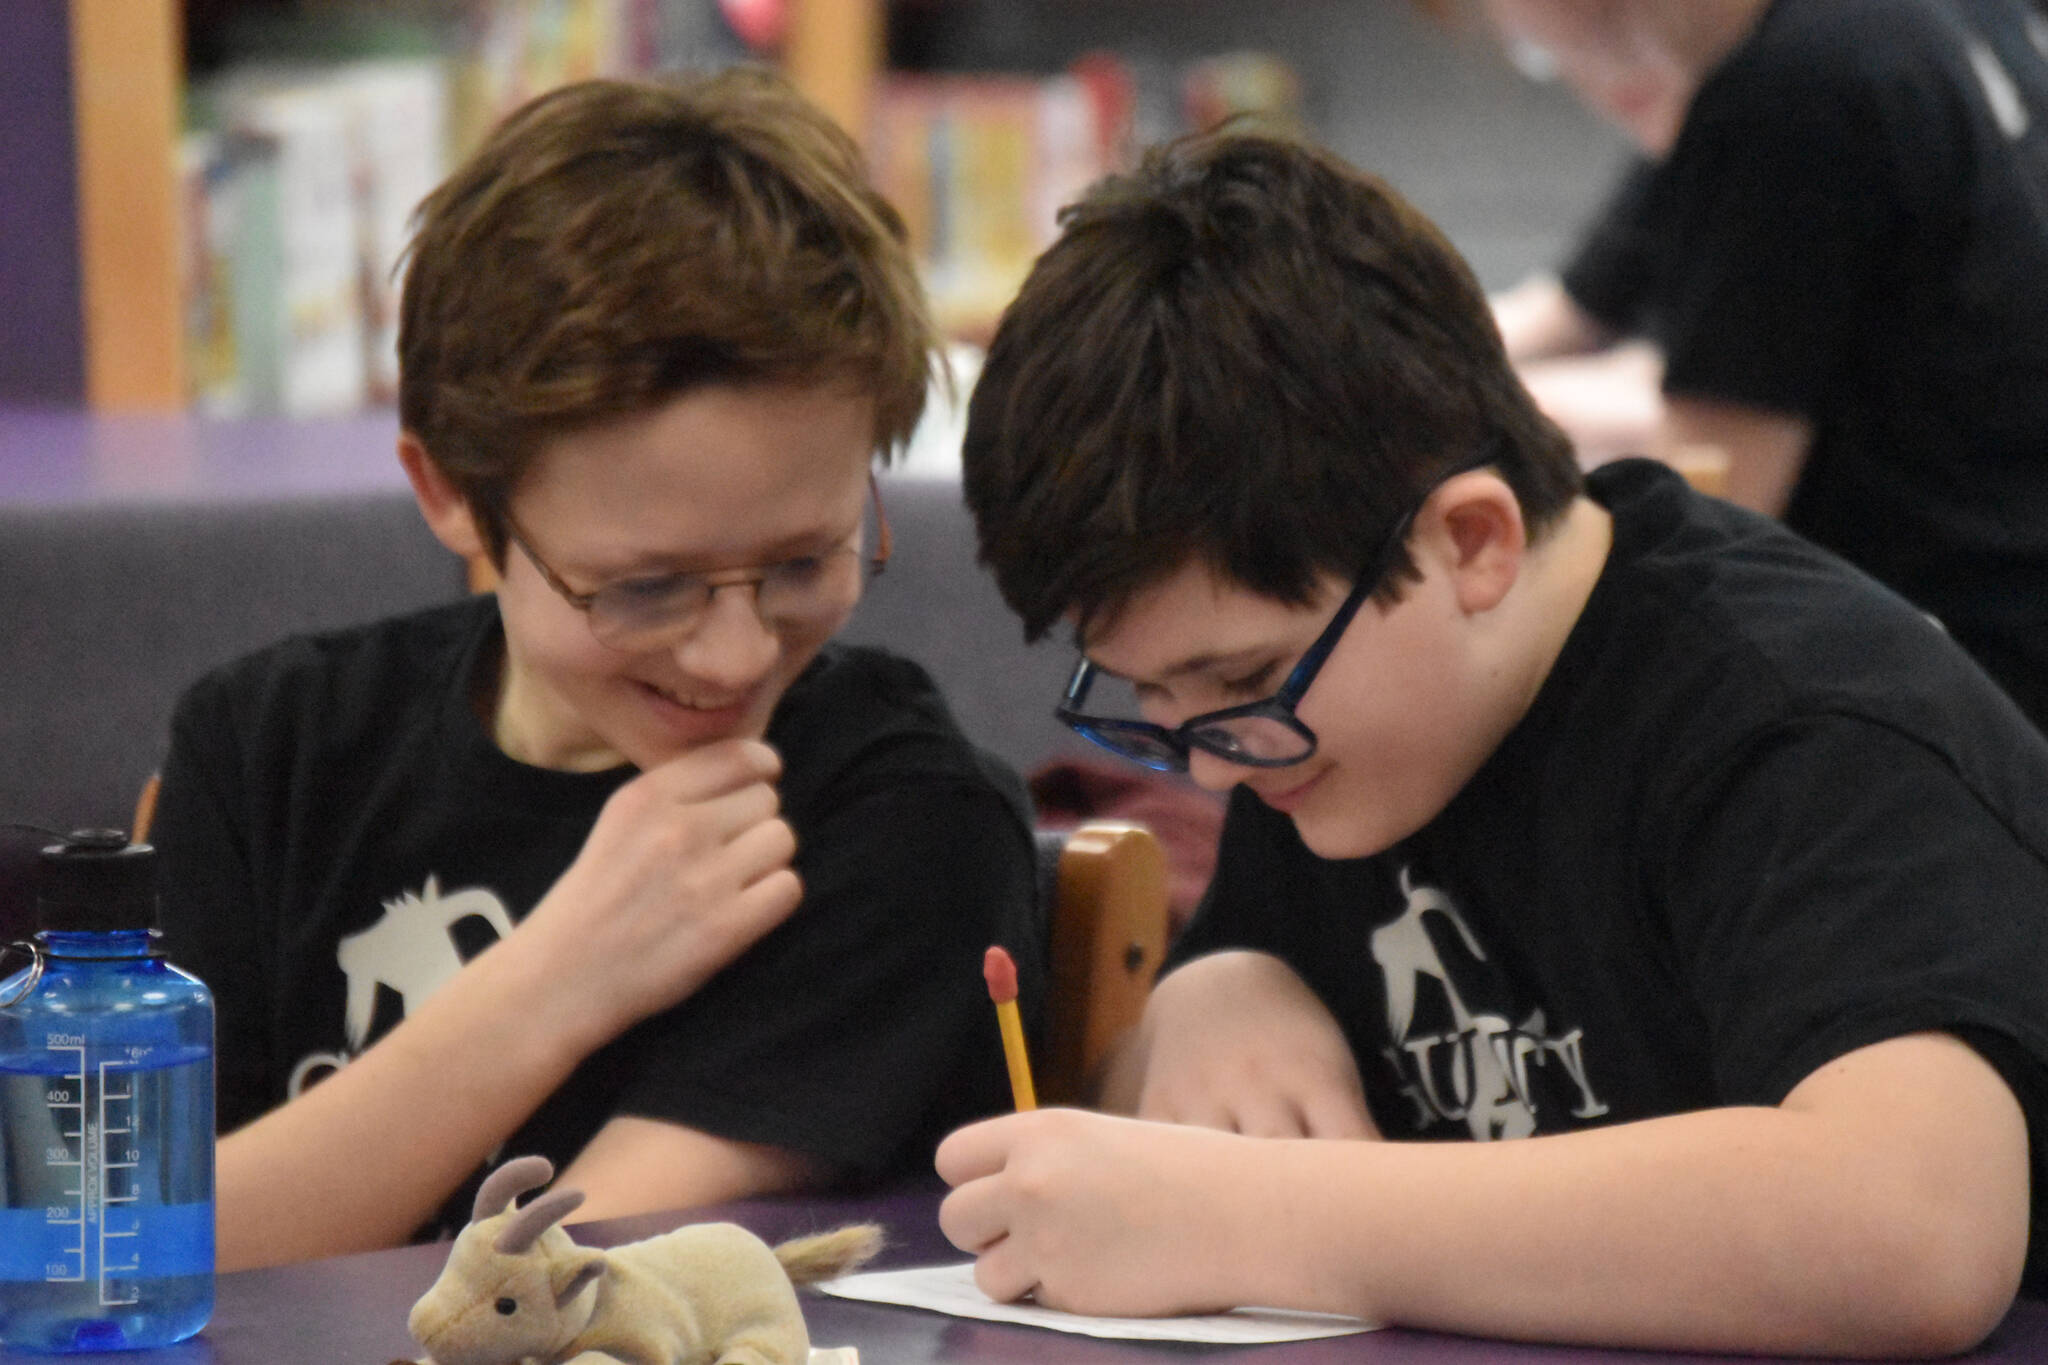 Luke Karpic and Oscar Marcou smile as they write their response to a question posed during Kenai Peninsula Borough School District Middle School Battle of the Books competition on Thursday, Feb. 9, 2023, at Kenai Middle School in Kenai, Alaska. (Jake Dye/Peninsula Clarion)